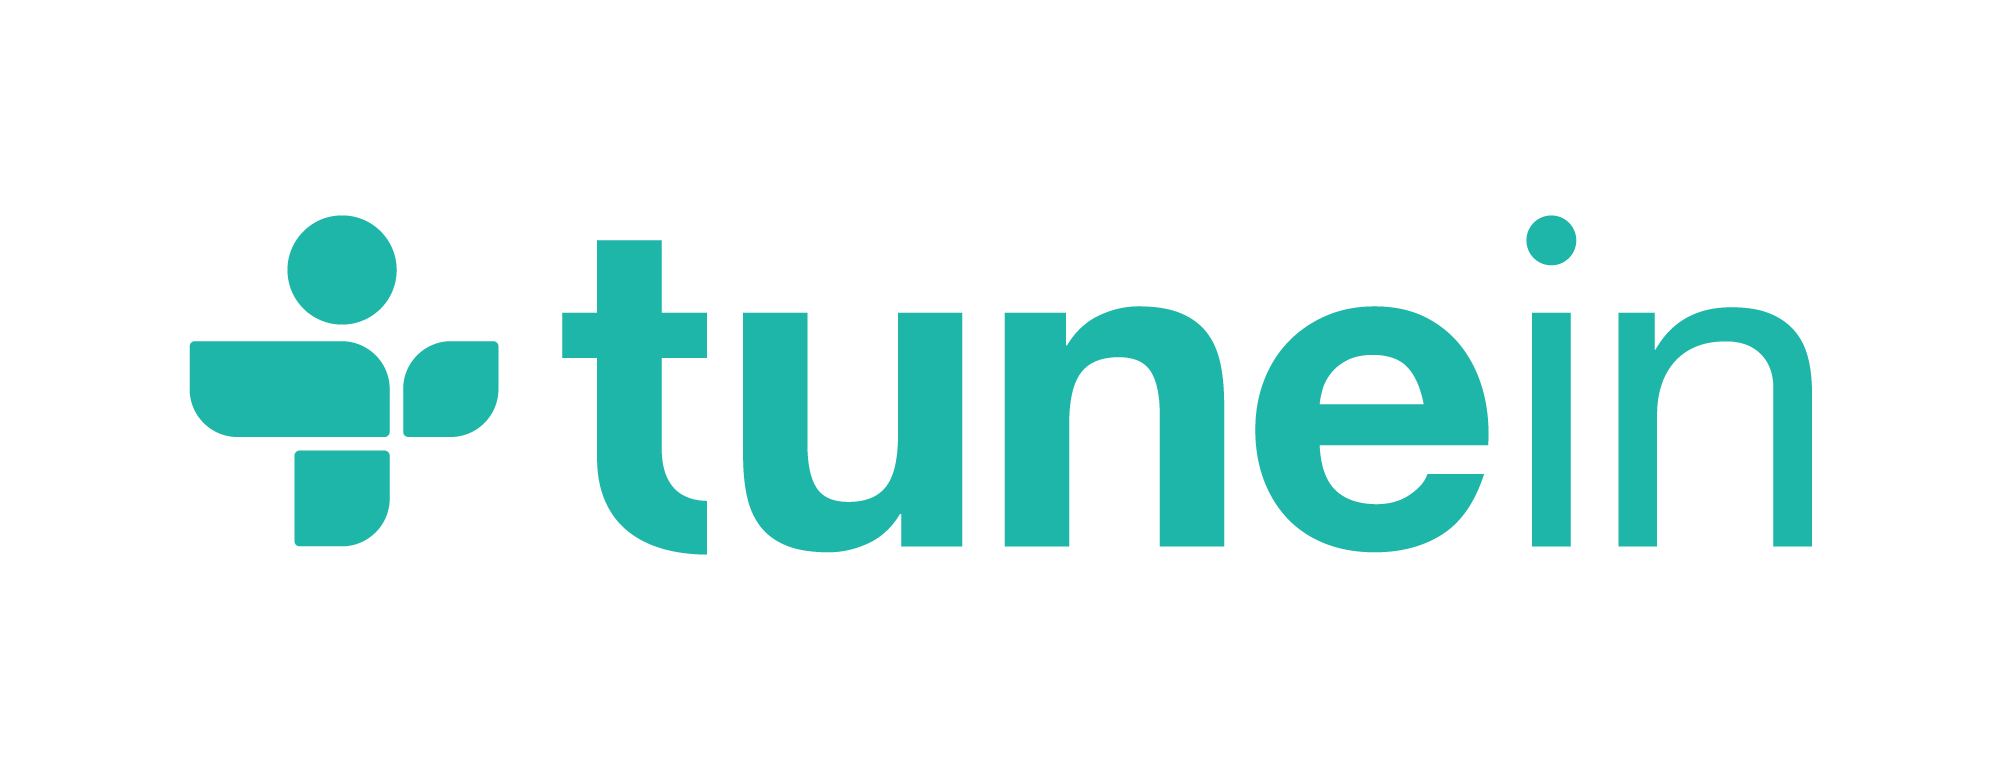 Adding Your Station To The TuneIn App